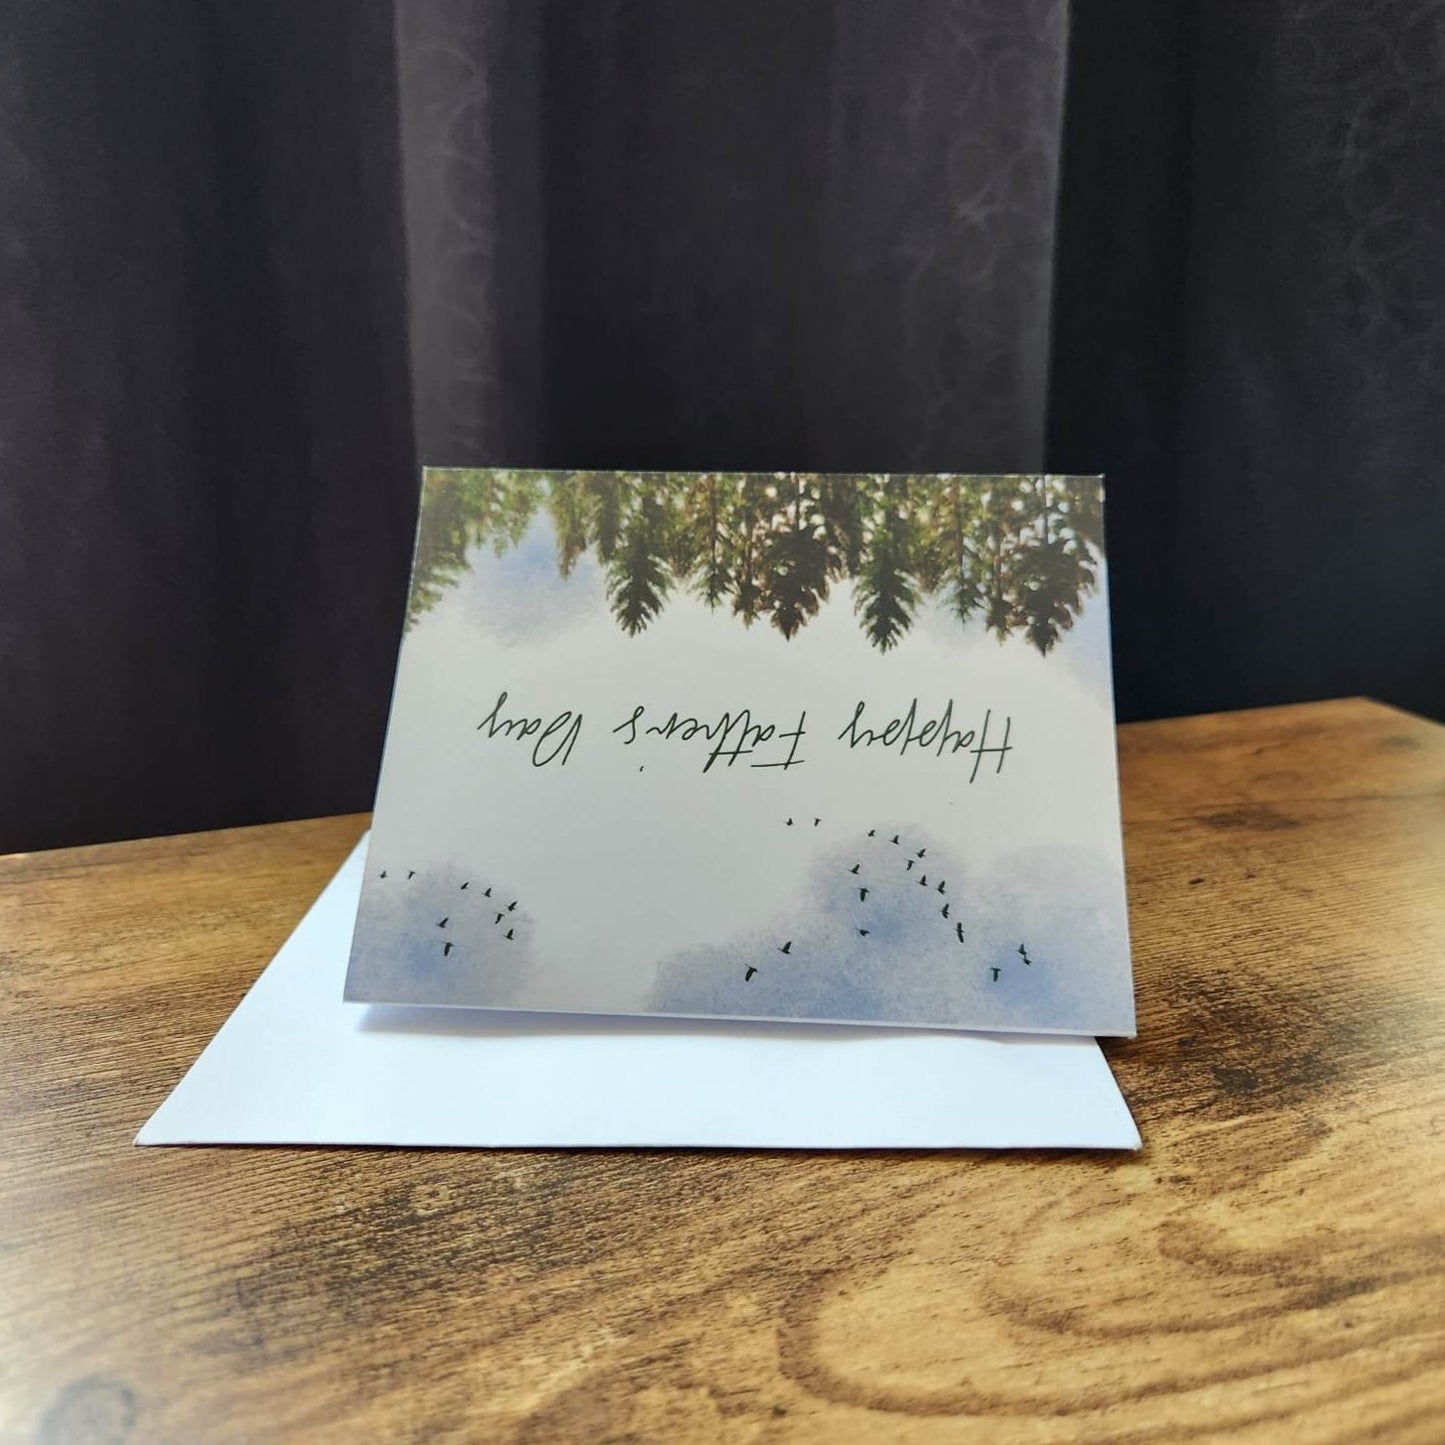 Happy father's day card, Outdoorsy card for dad,  Forest cottage landscape dad greeting card, Painted trees adventure outdoors camping card